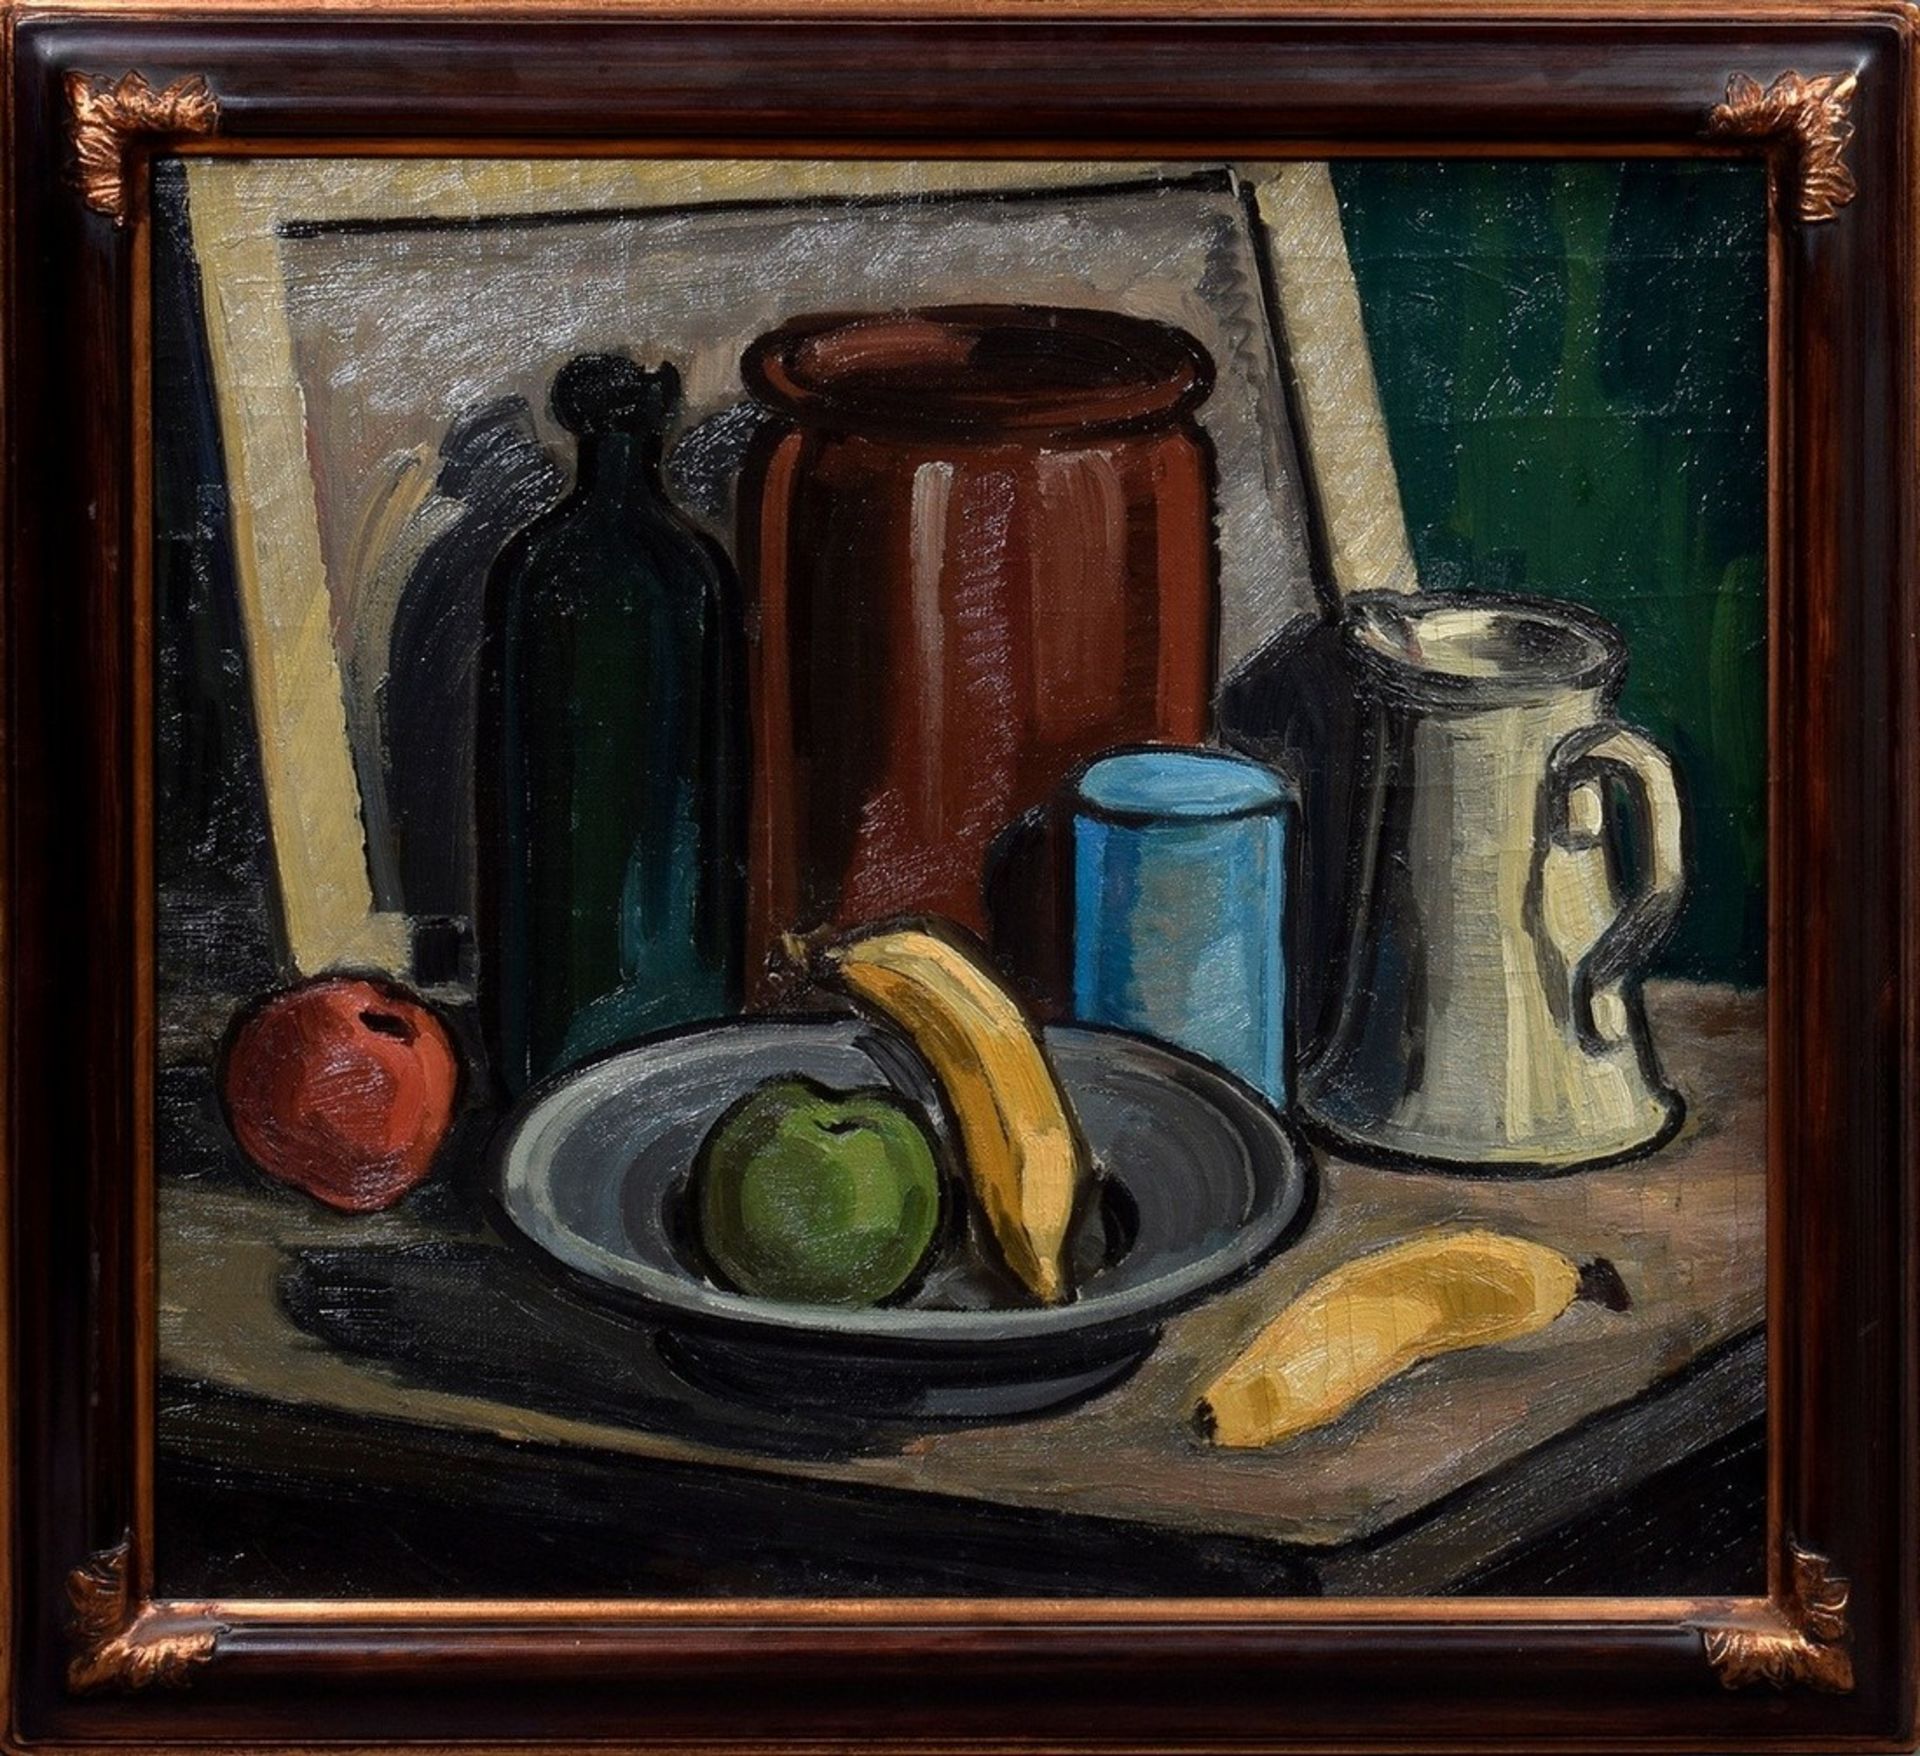 Monogrammed artist of the 20th c. "Still life with jars and fruit", oil/canvas, b.l. monogr. "C.E", - Image 2 of 3